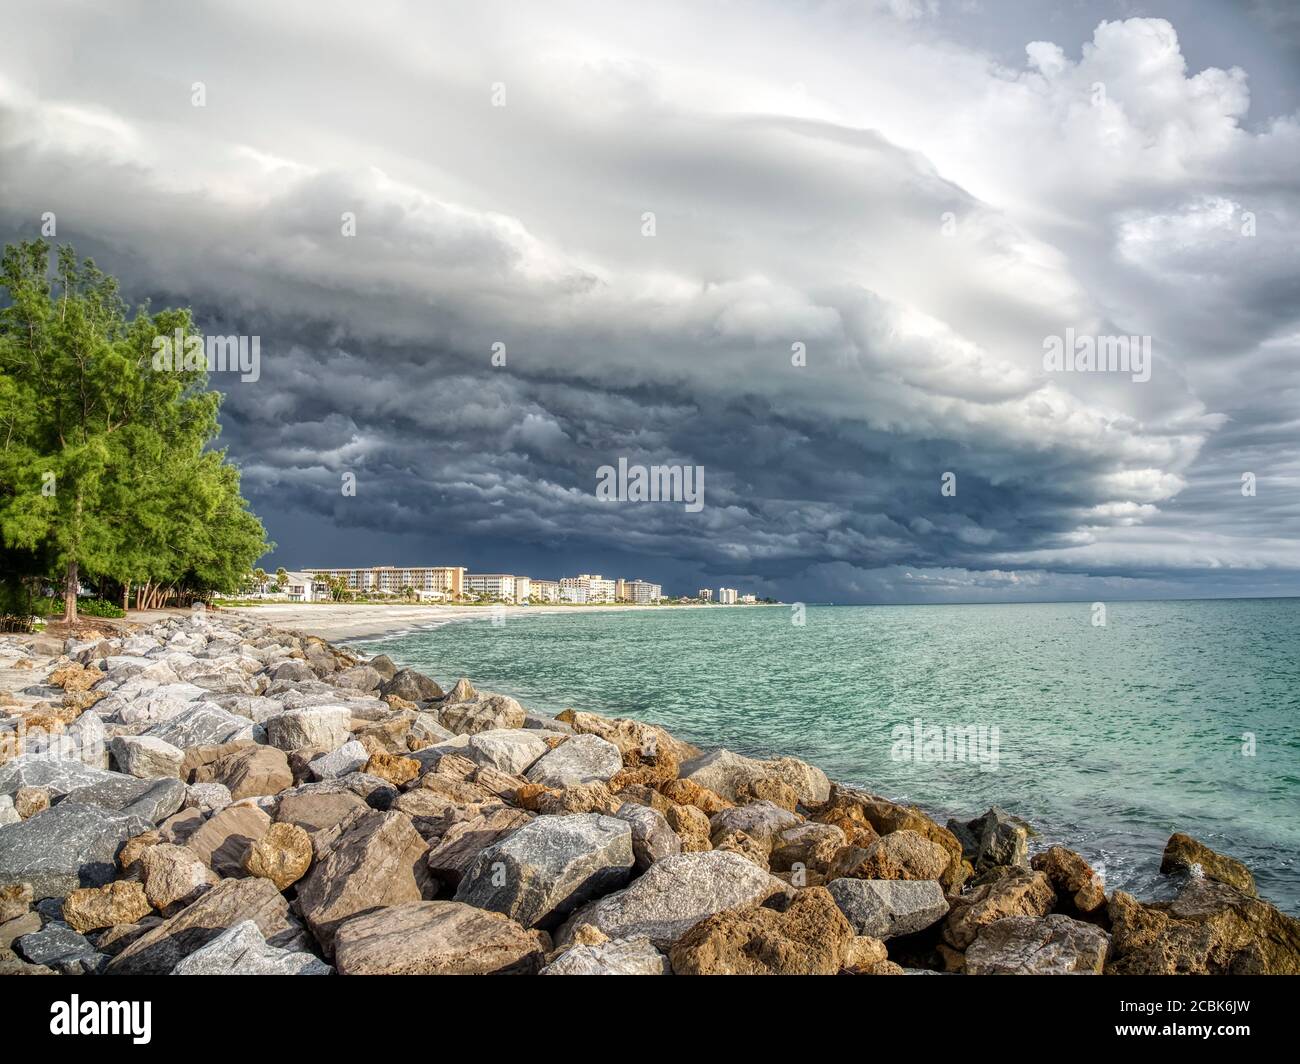 Summer storm over Gulf of Mexcio in southwest city of Venice Florida in the United States Stock Photo